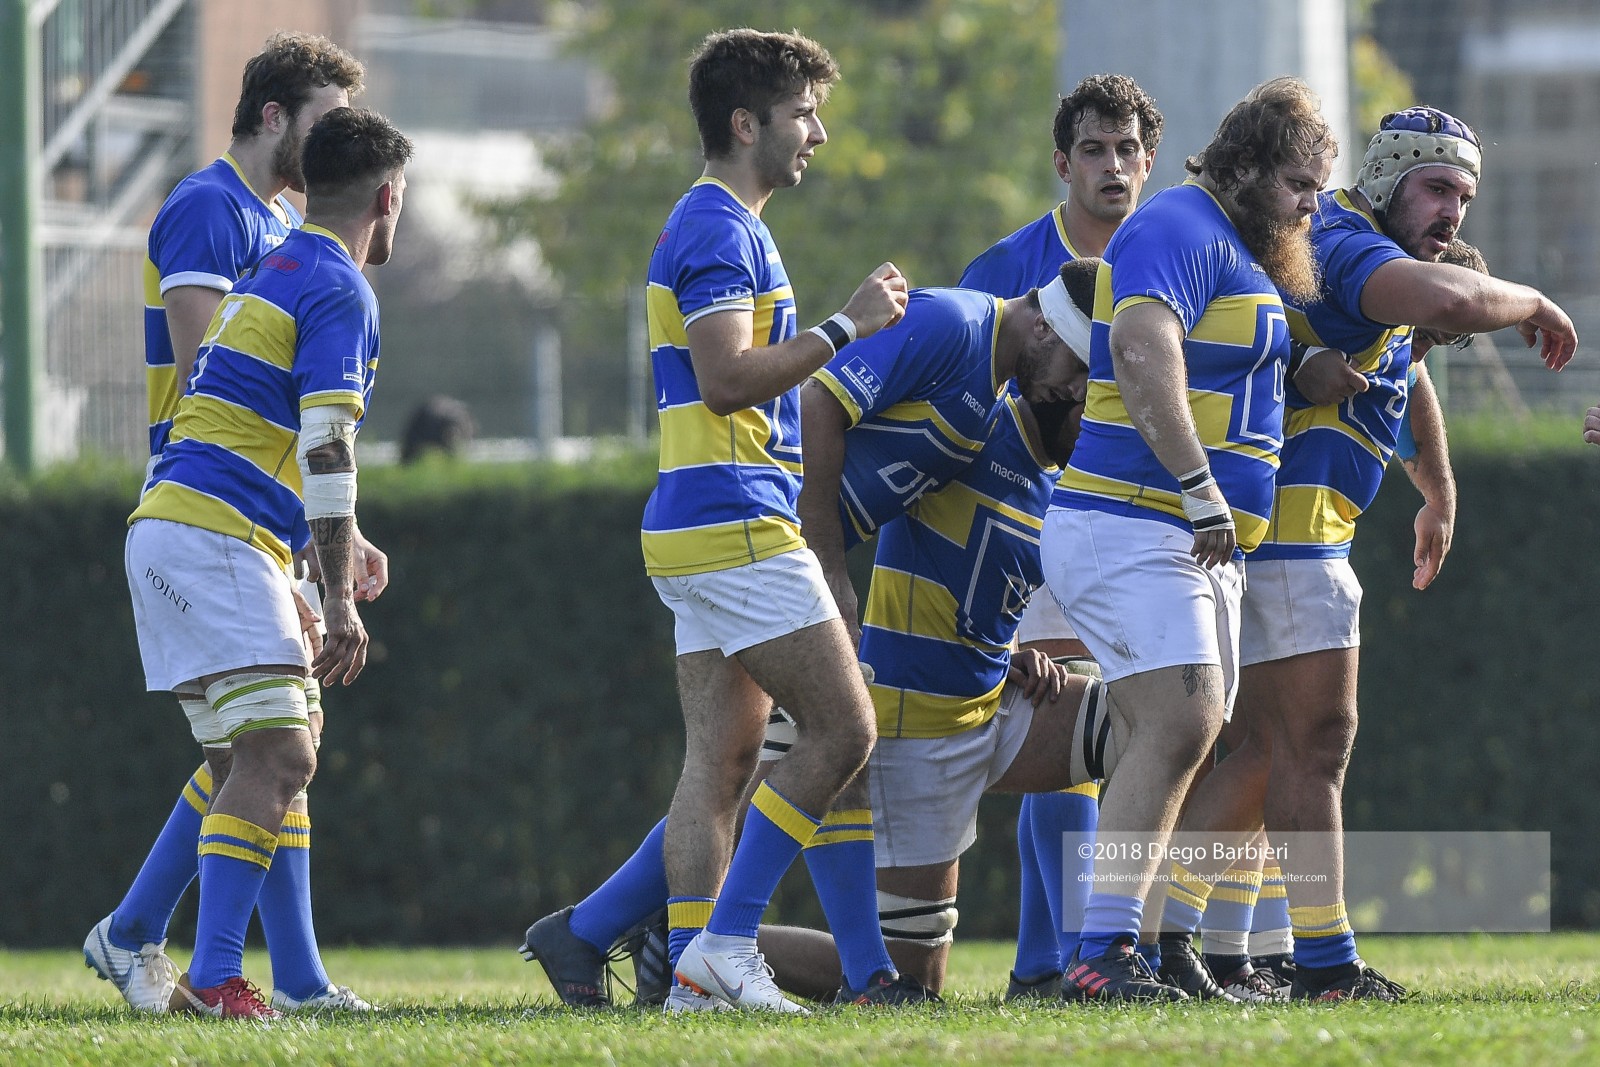 Serie A: TK Group VII Rugby Torino - Itinera CUS Ad Maiora Rugby 1951